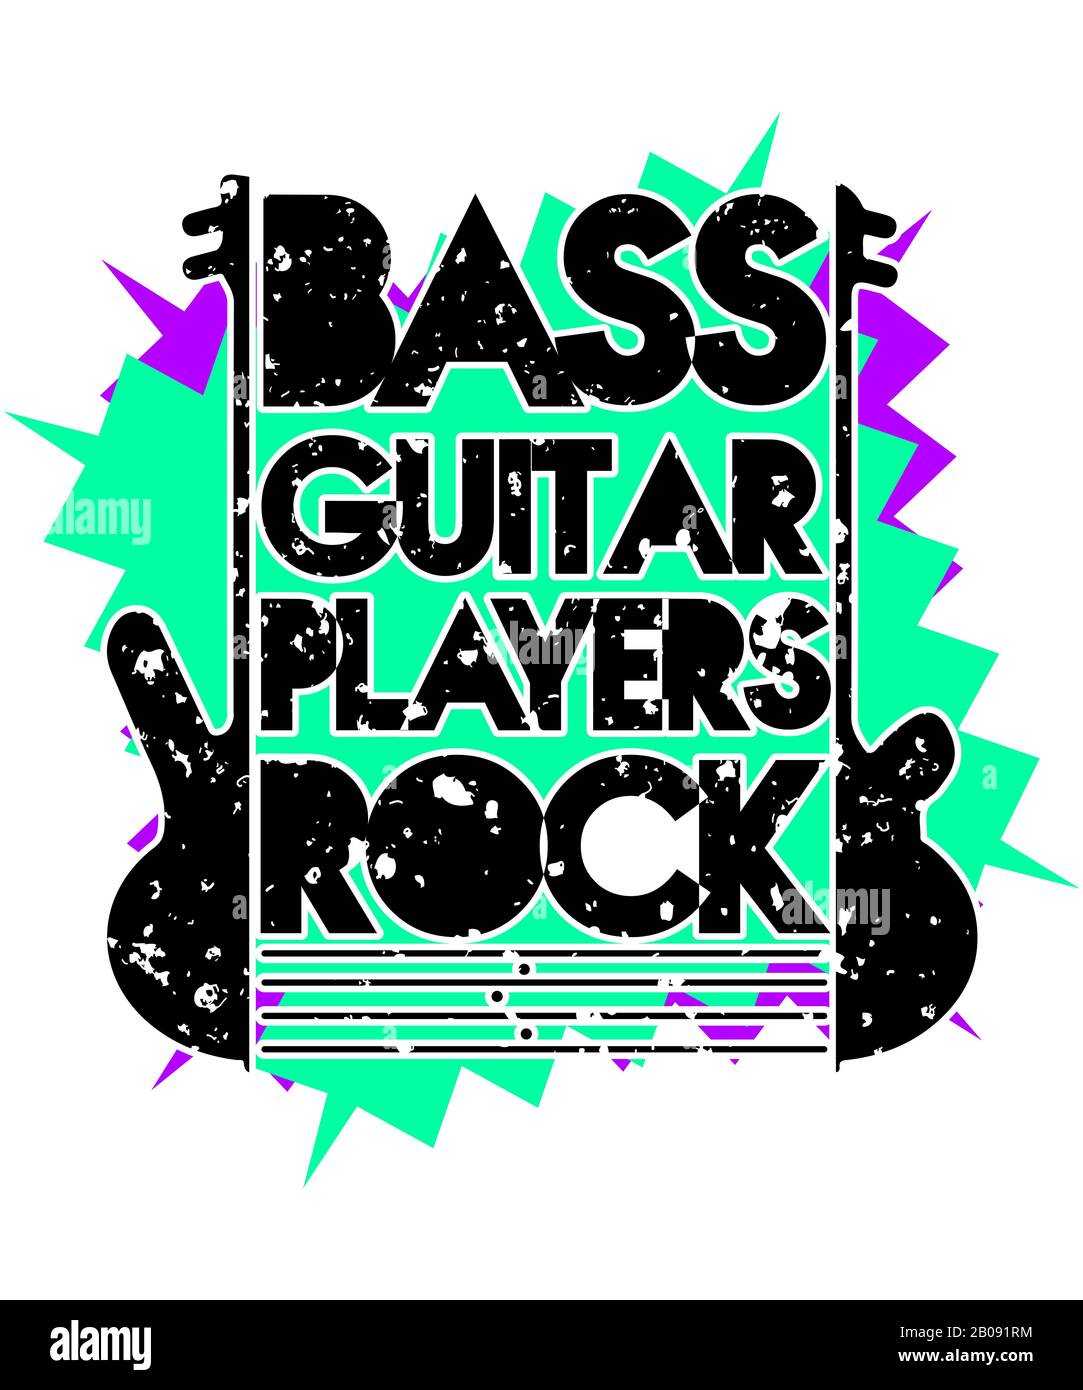 Bass guitar players rock graphic in a grunge typography design with bass guitar instruments in the illustration on a white background. Stock Photo